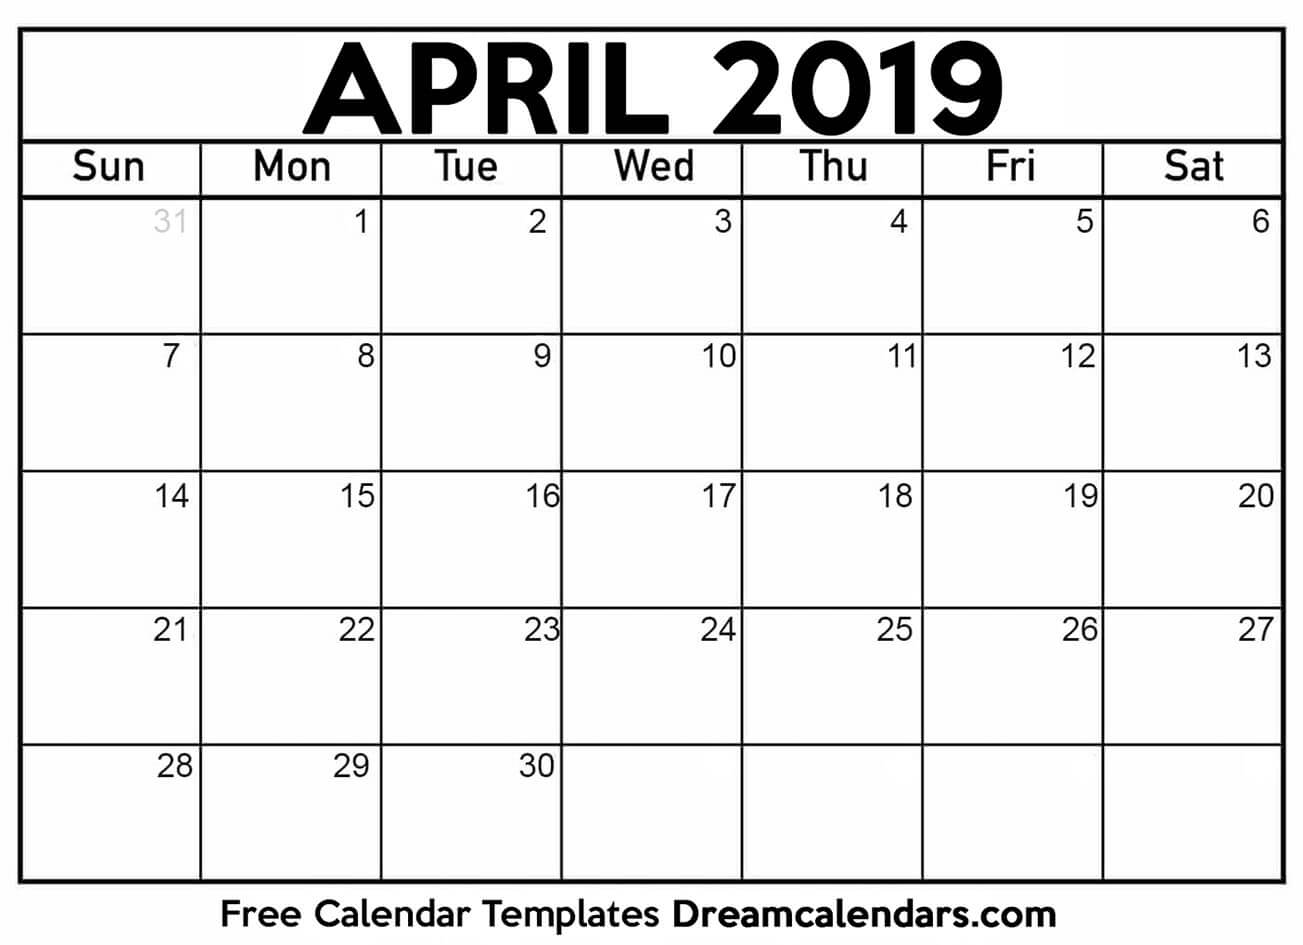 April 2019 Calendar Free Printable with Holidays and Observances